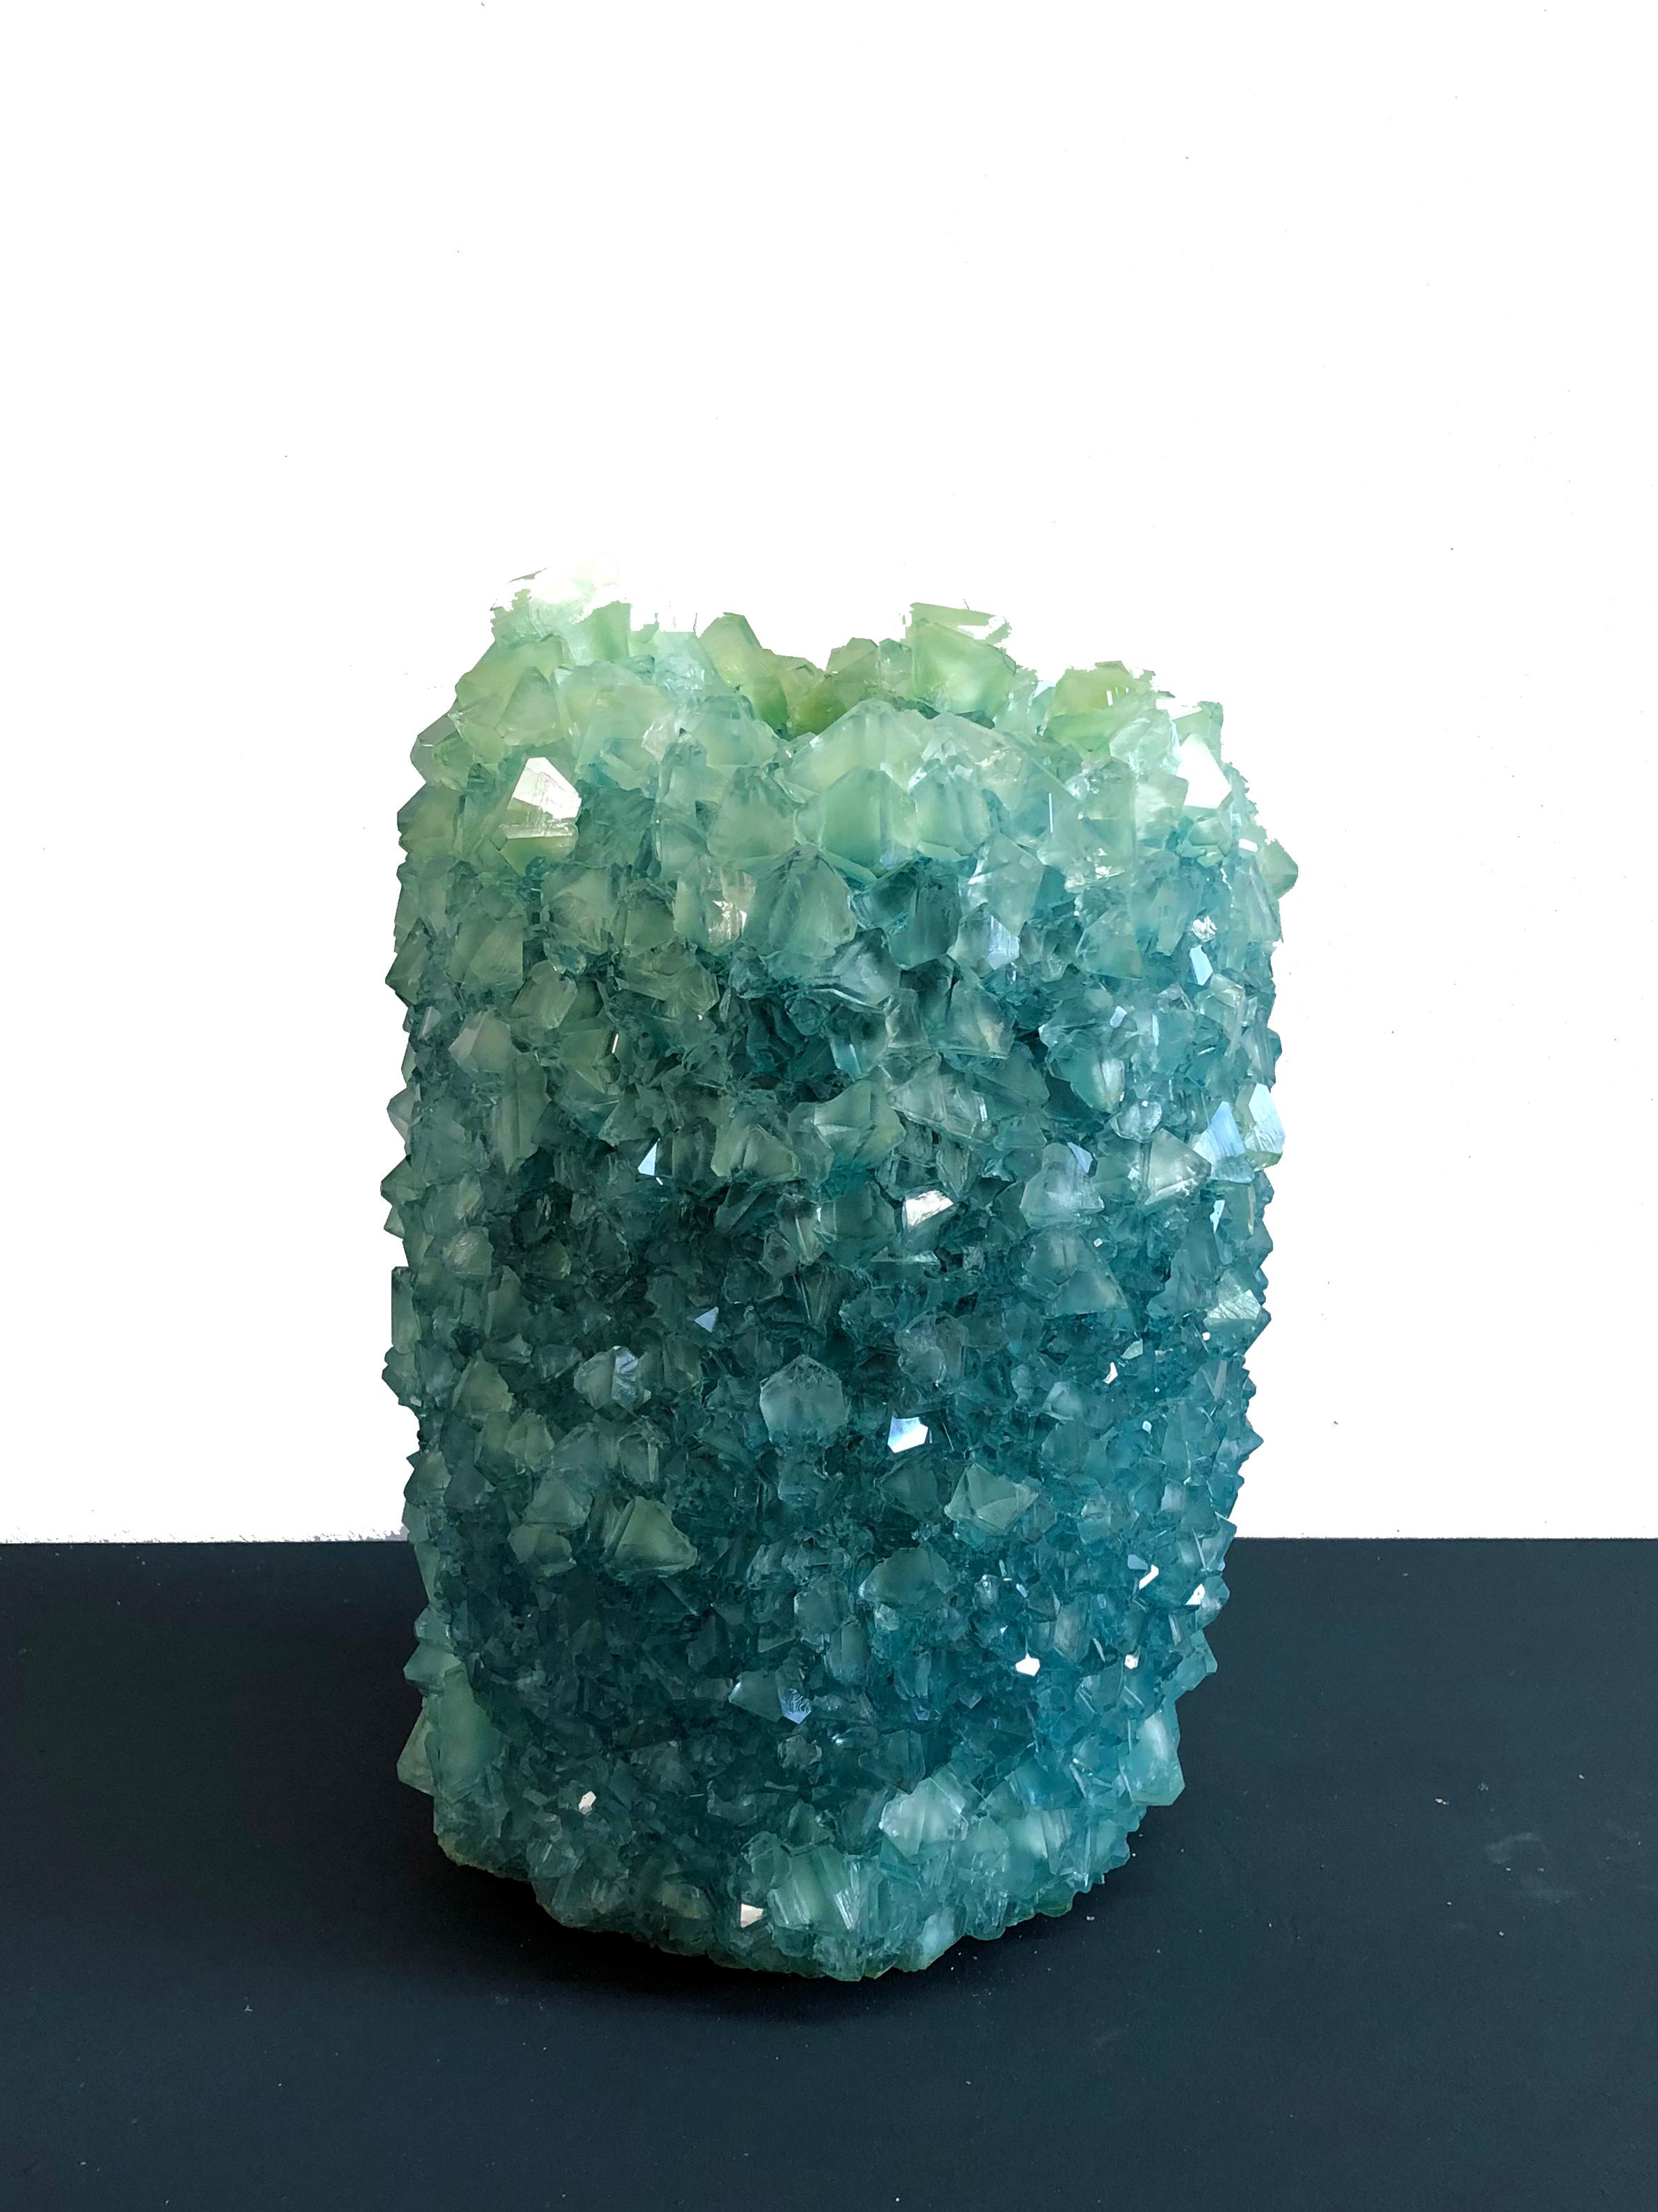 Baroque Crystal Vase Teal Large 2 by Isaac Monte